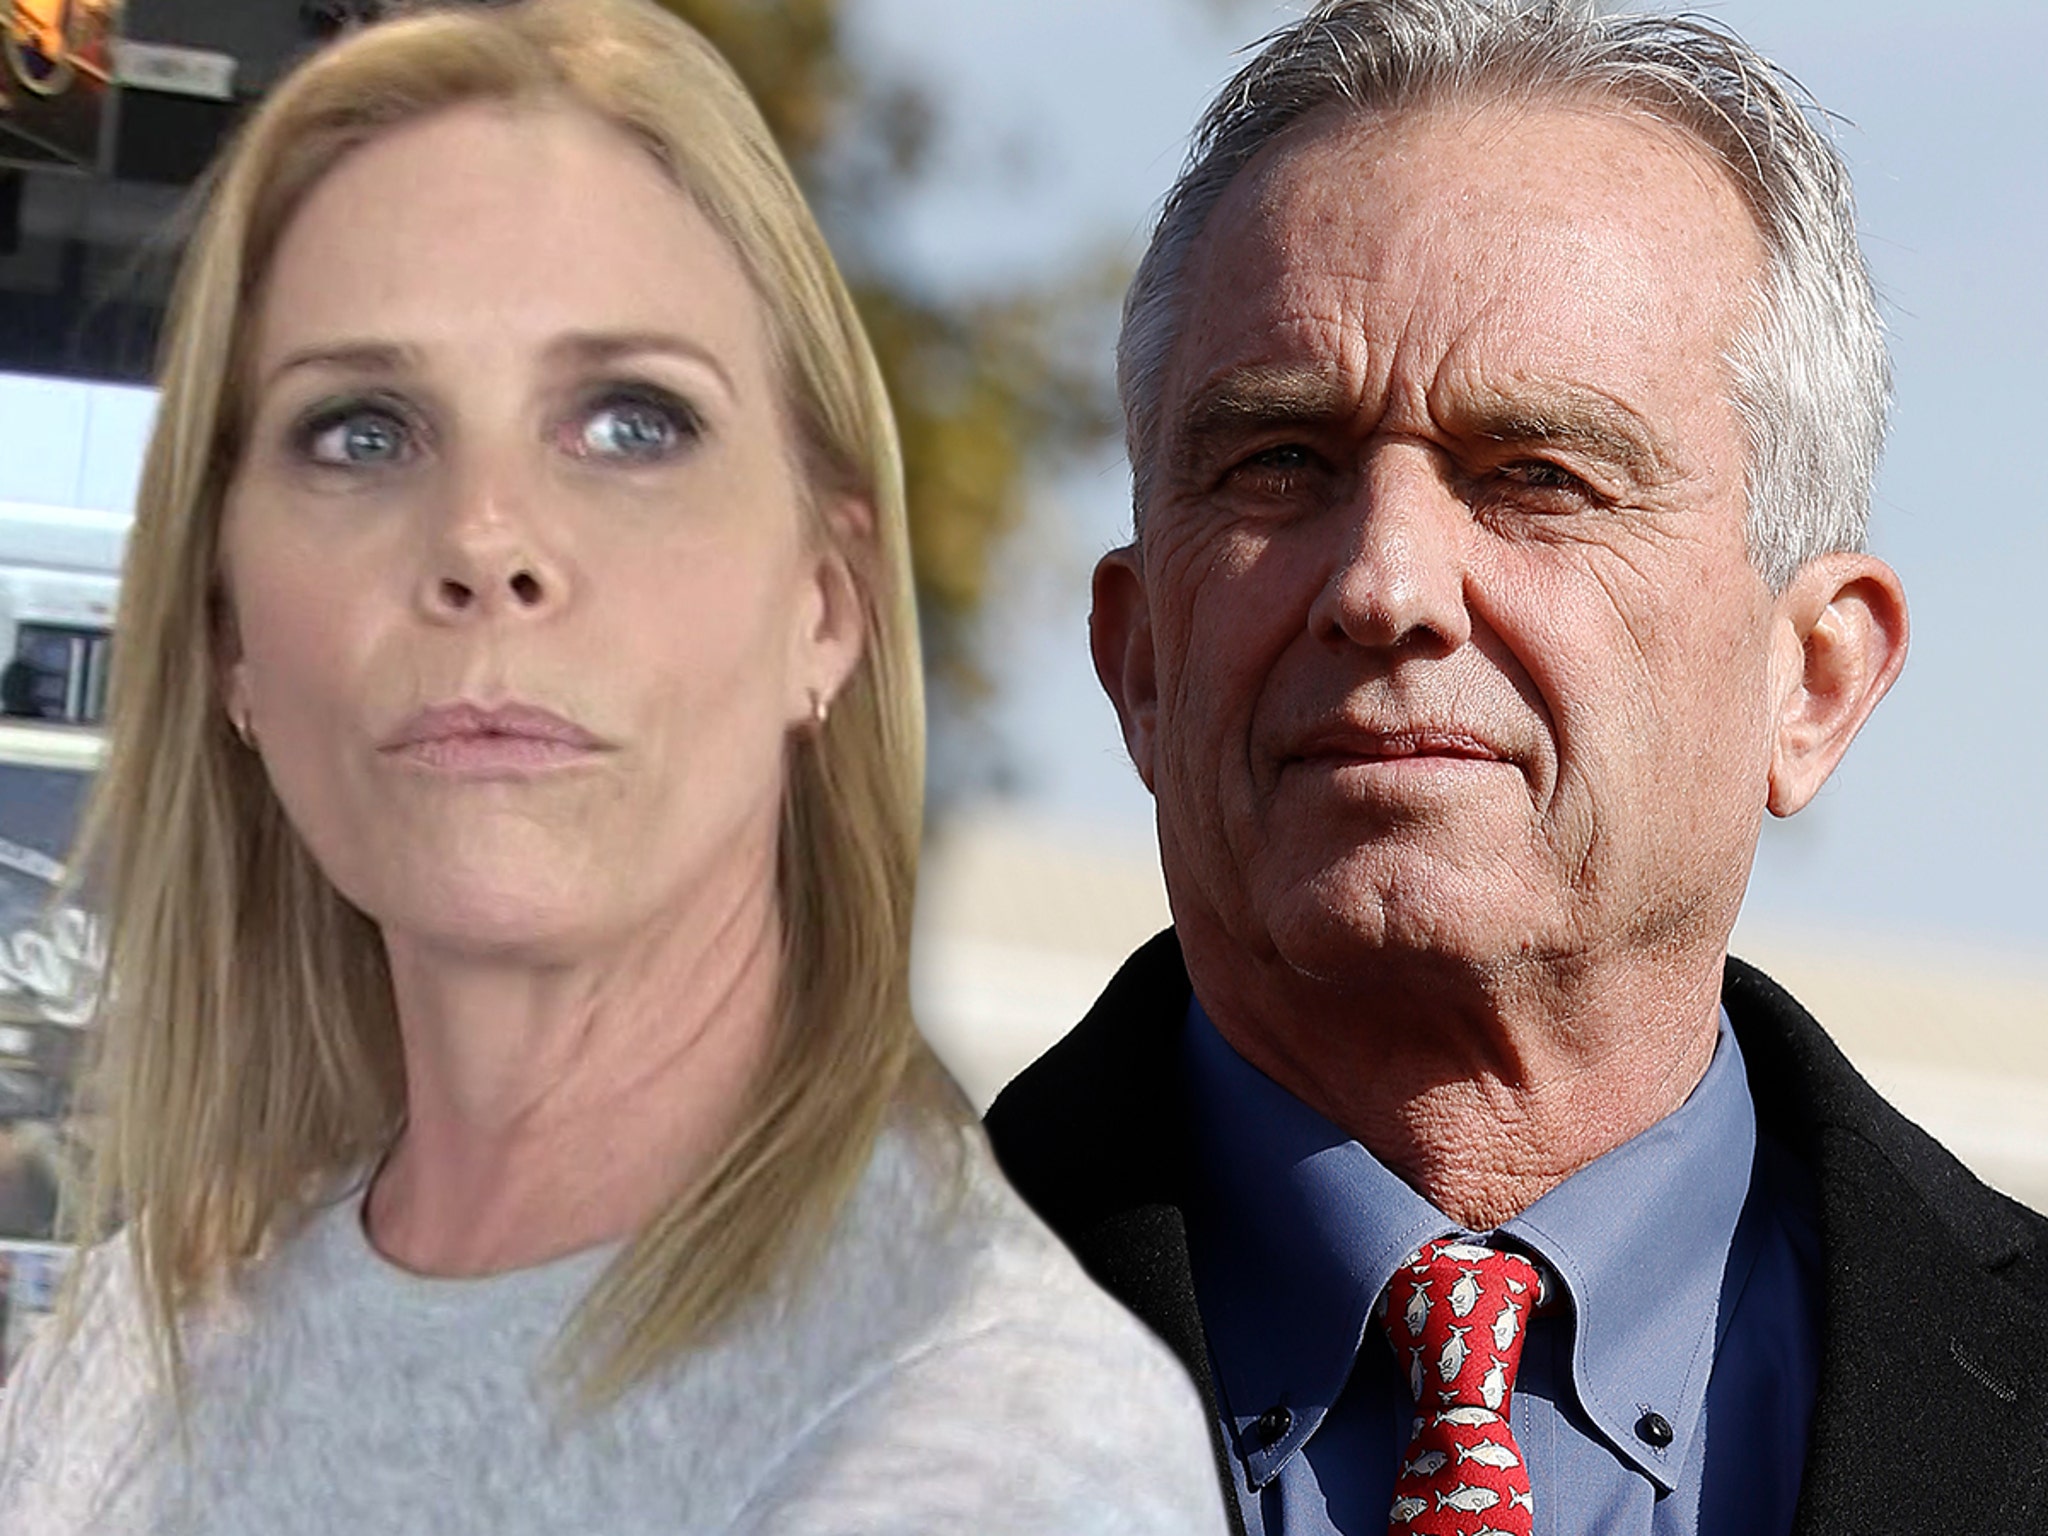 lavendel Sporvogn overtro Robert F. Kennedy Jr. Blames Cheryl Hines for Holiday Party Vaccine  Recommendation